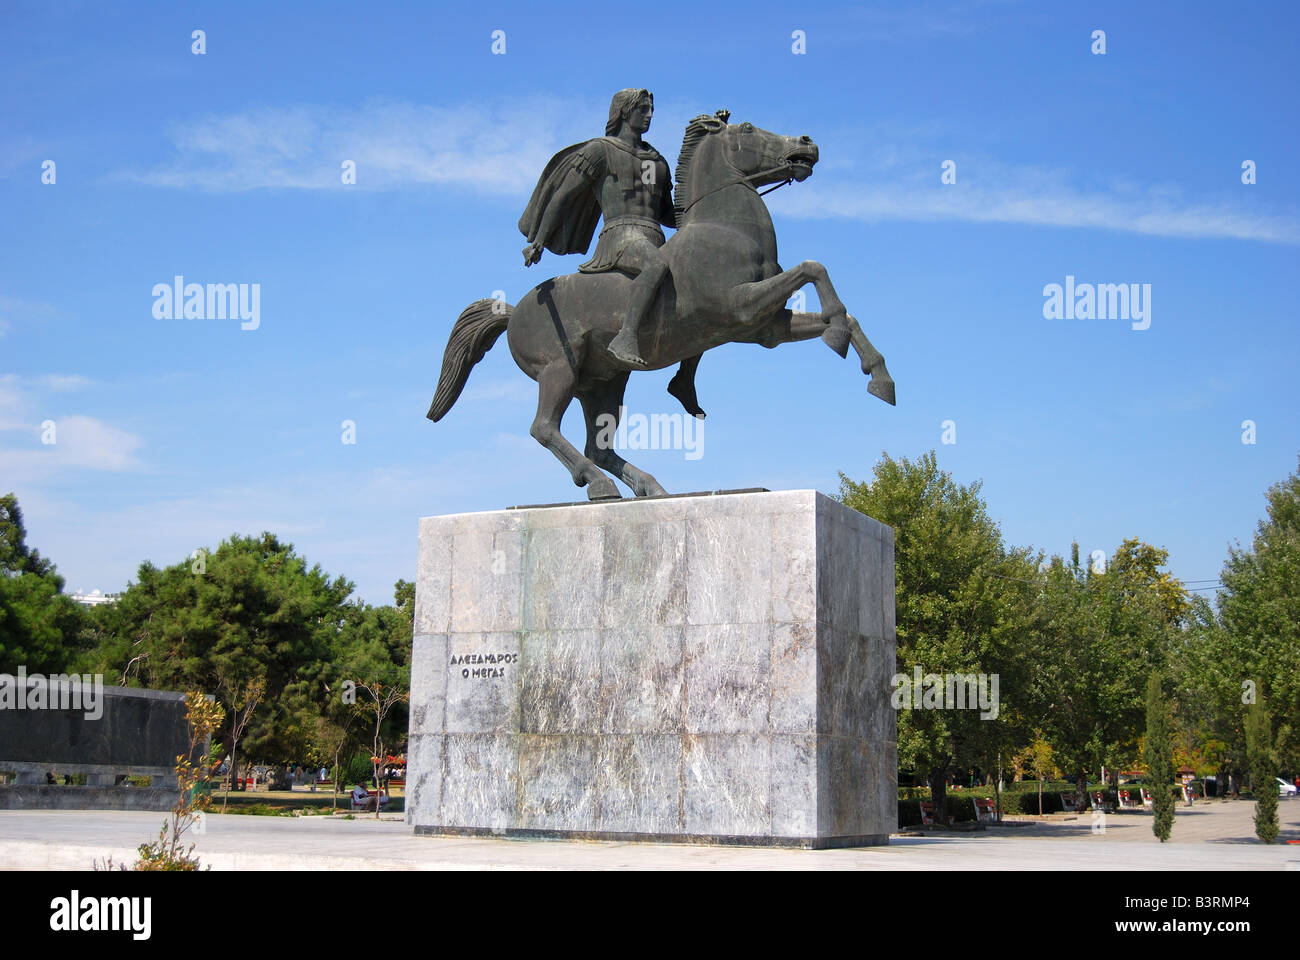 Alexander the Great statue on seafront, YMCA Park, Thessaloniki, Chalkidiki, Central Macedonia, Greece Stock Photo